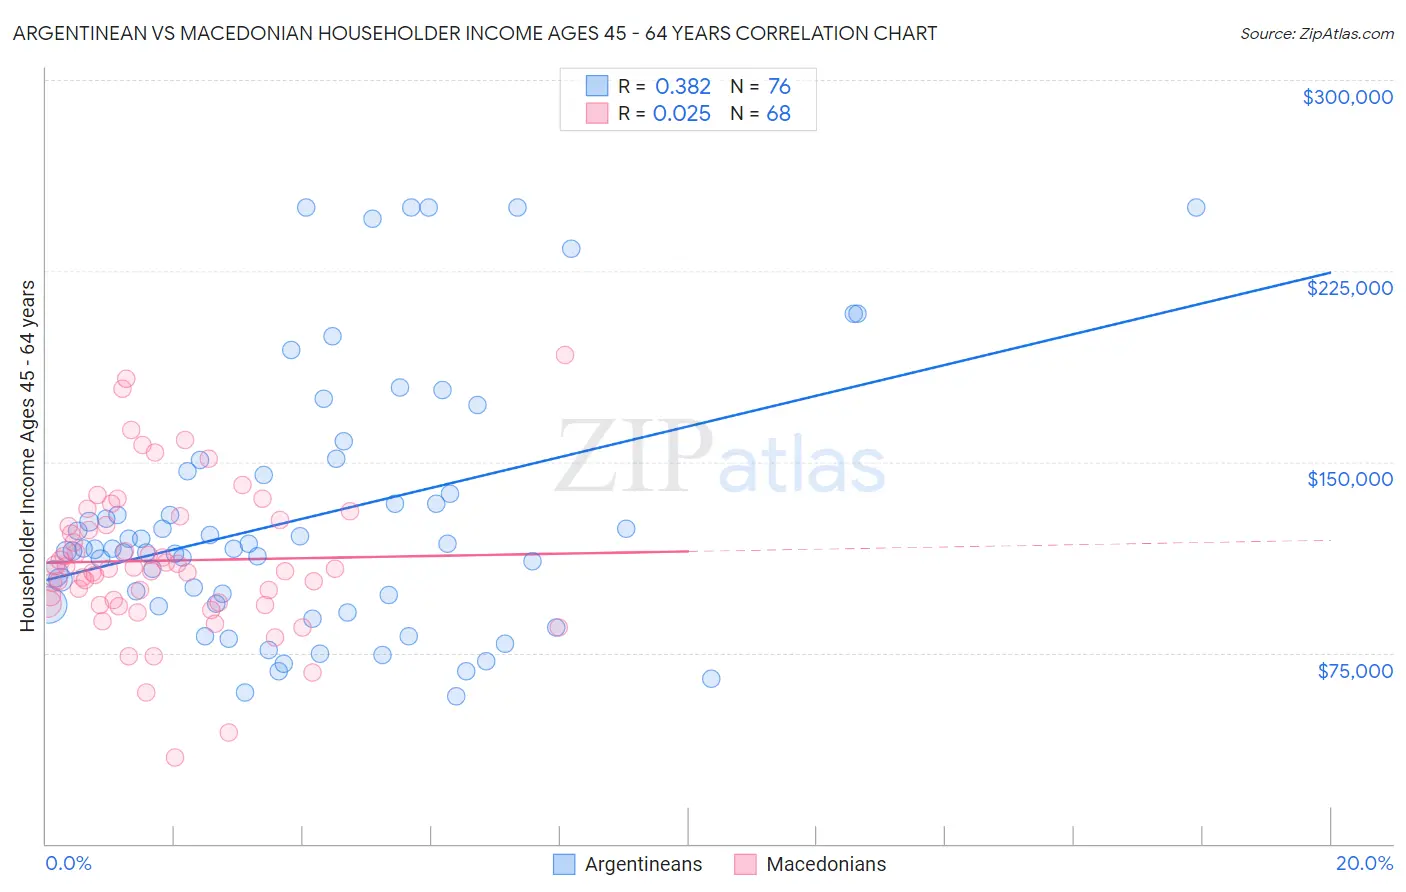 Argentinean vs Macedonian Householder Income Ages 45 - 64 years